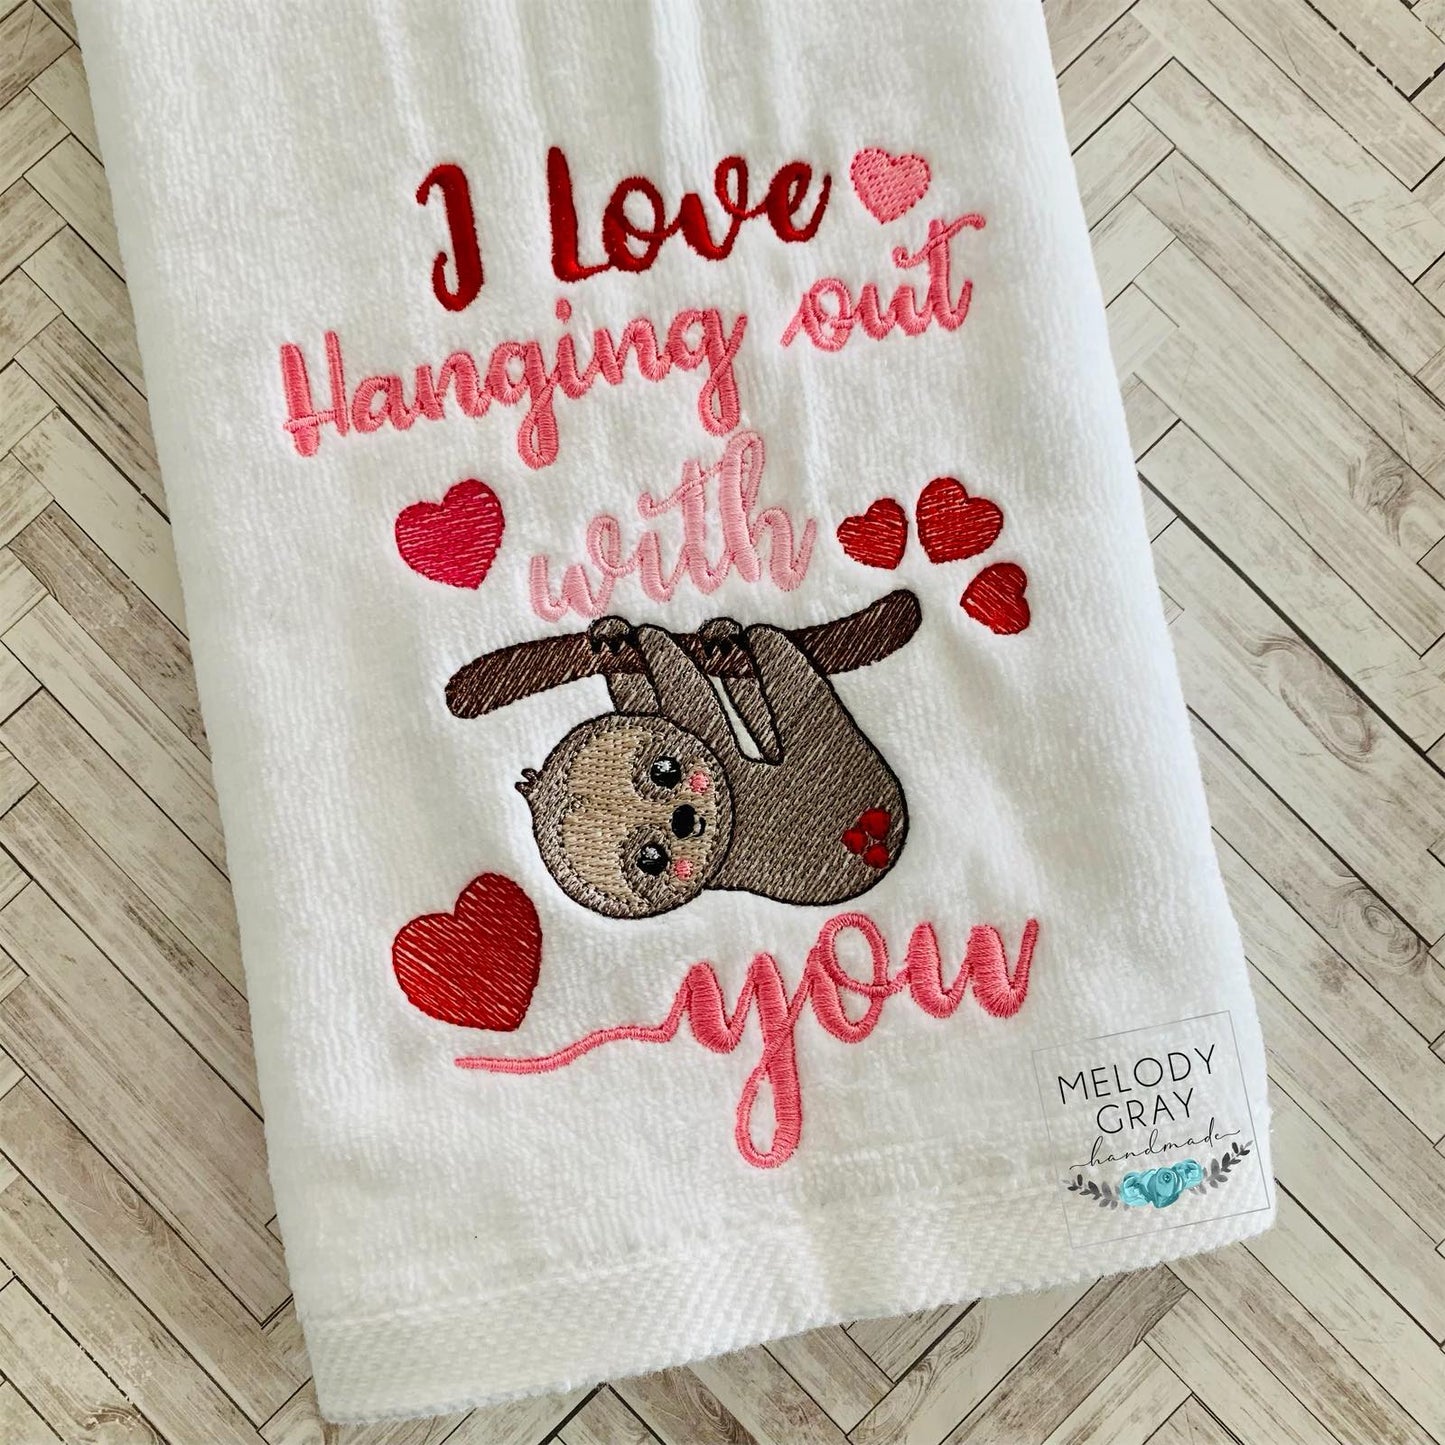 I Love Hanging Out With You - 3 sizes- Digital Embroidery Design